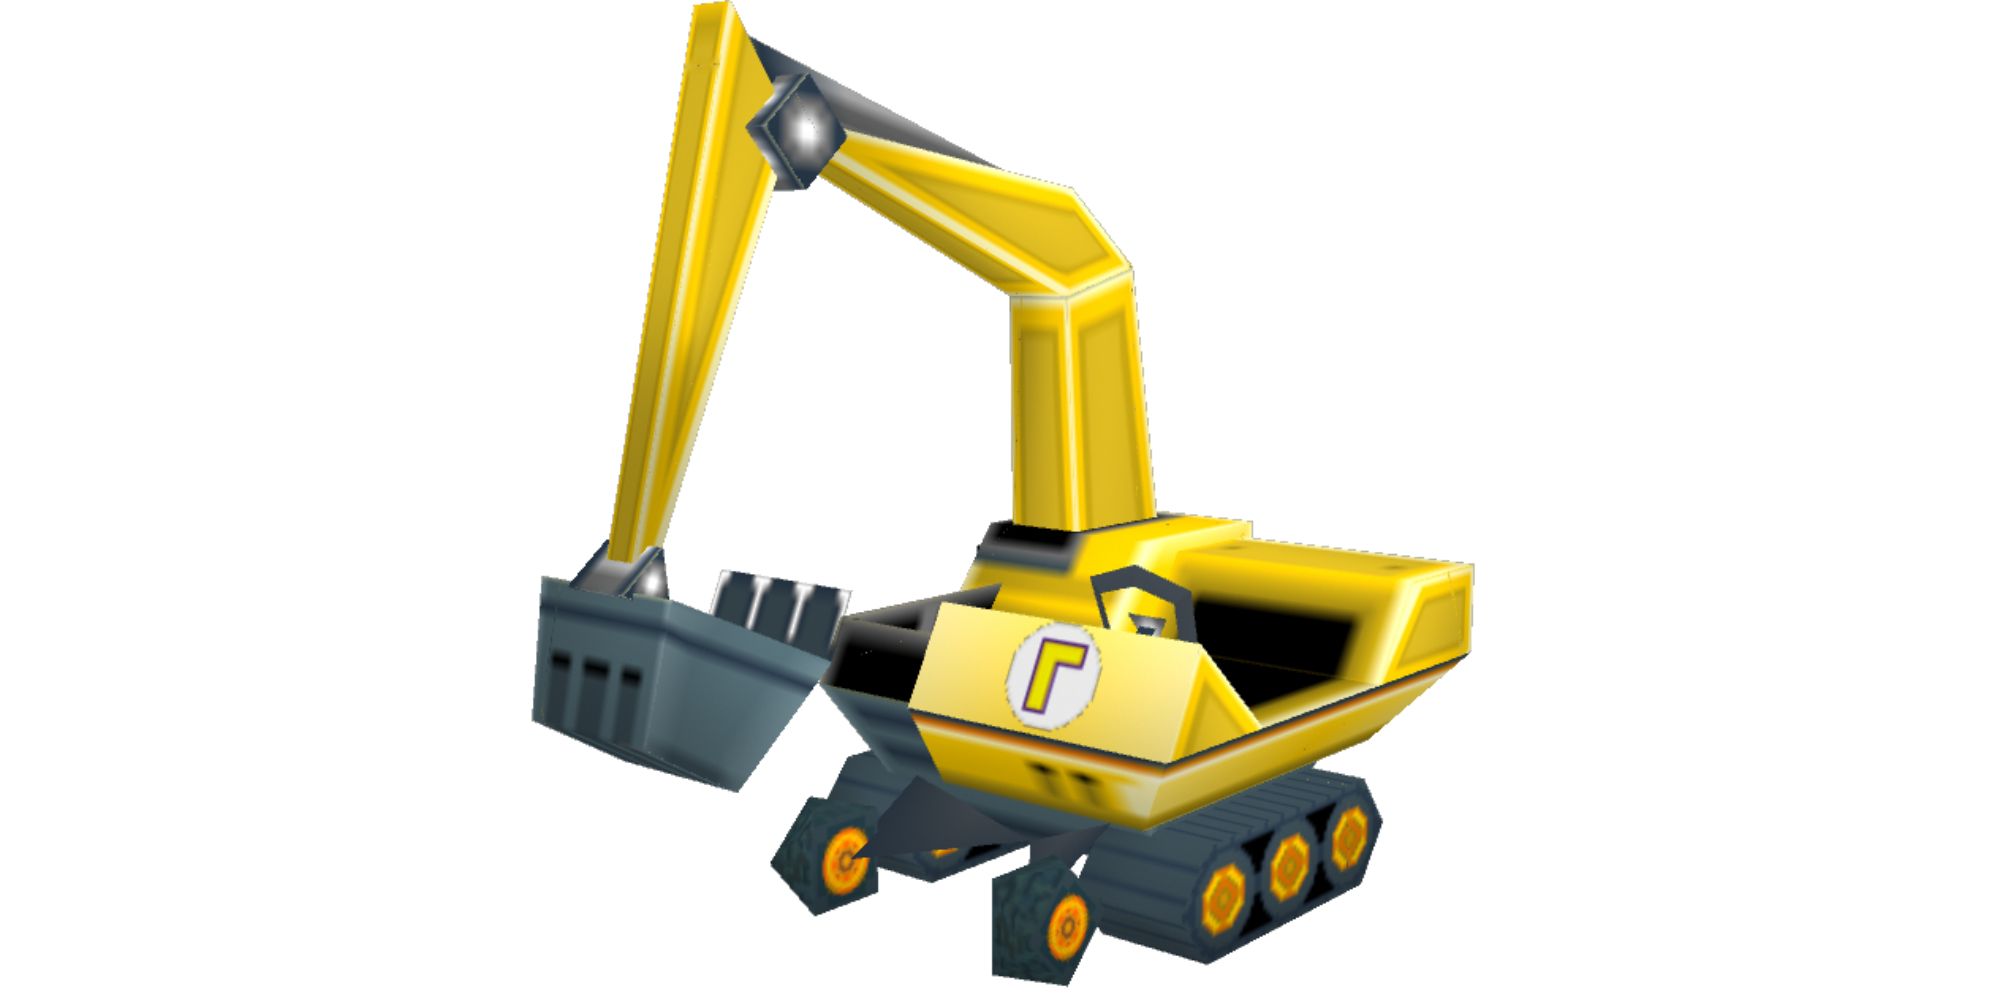 Mario Kart Vehicle Designs an empty Gold Mantis kart with its digger tucked in against a white backdrop